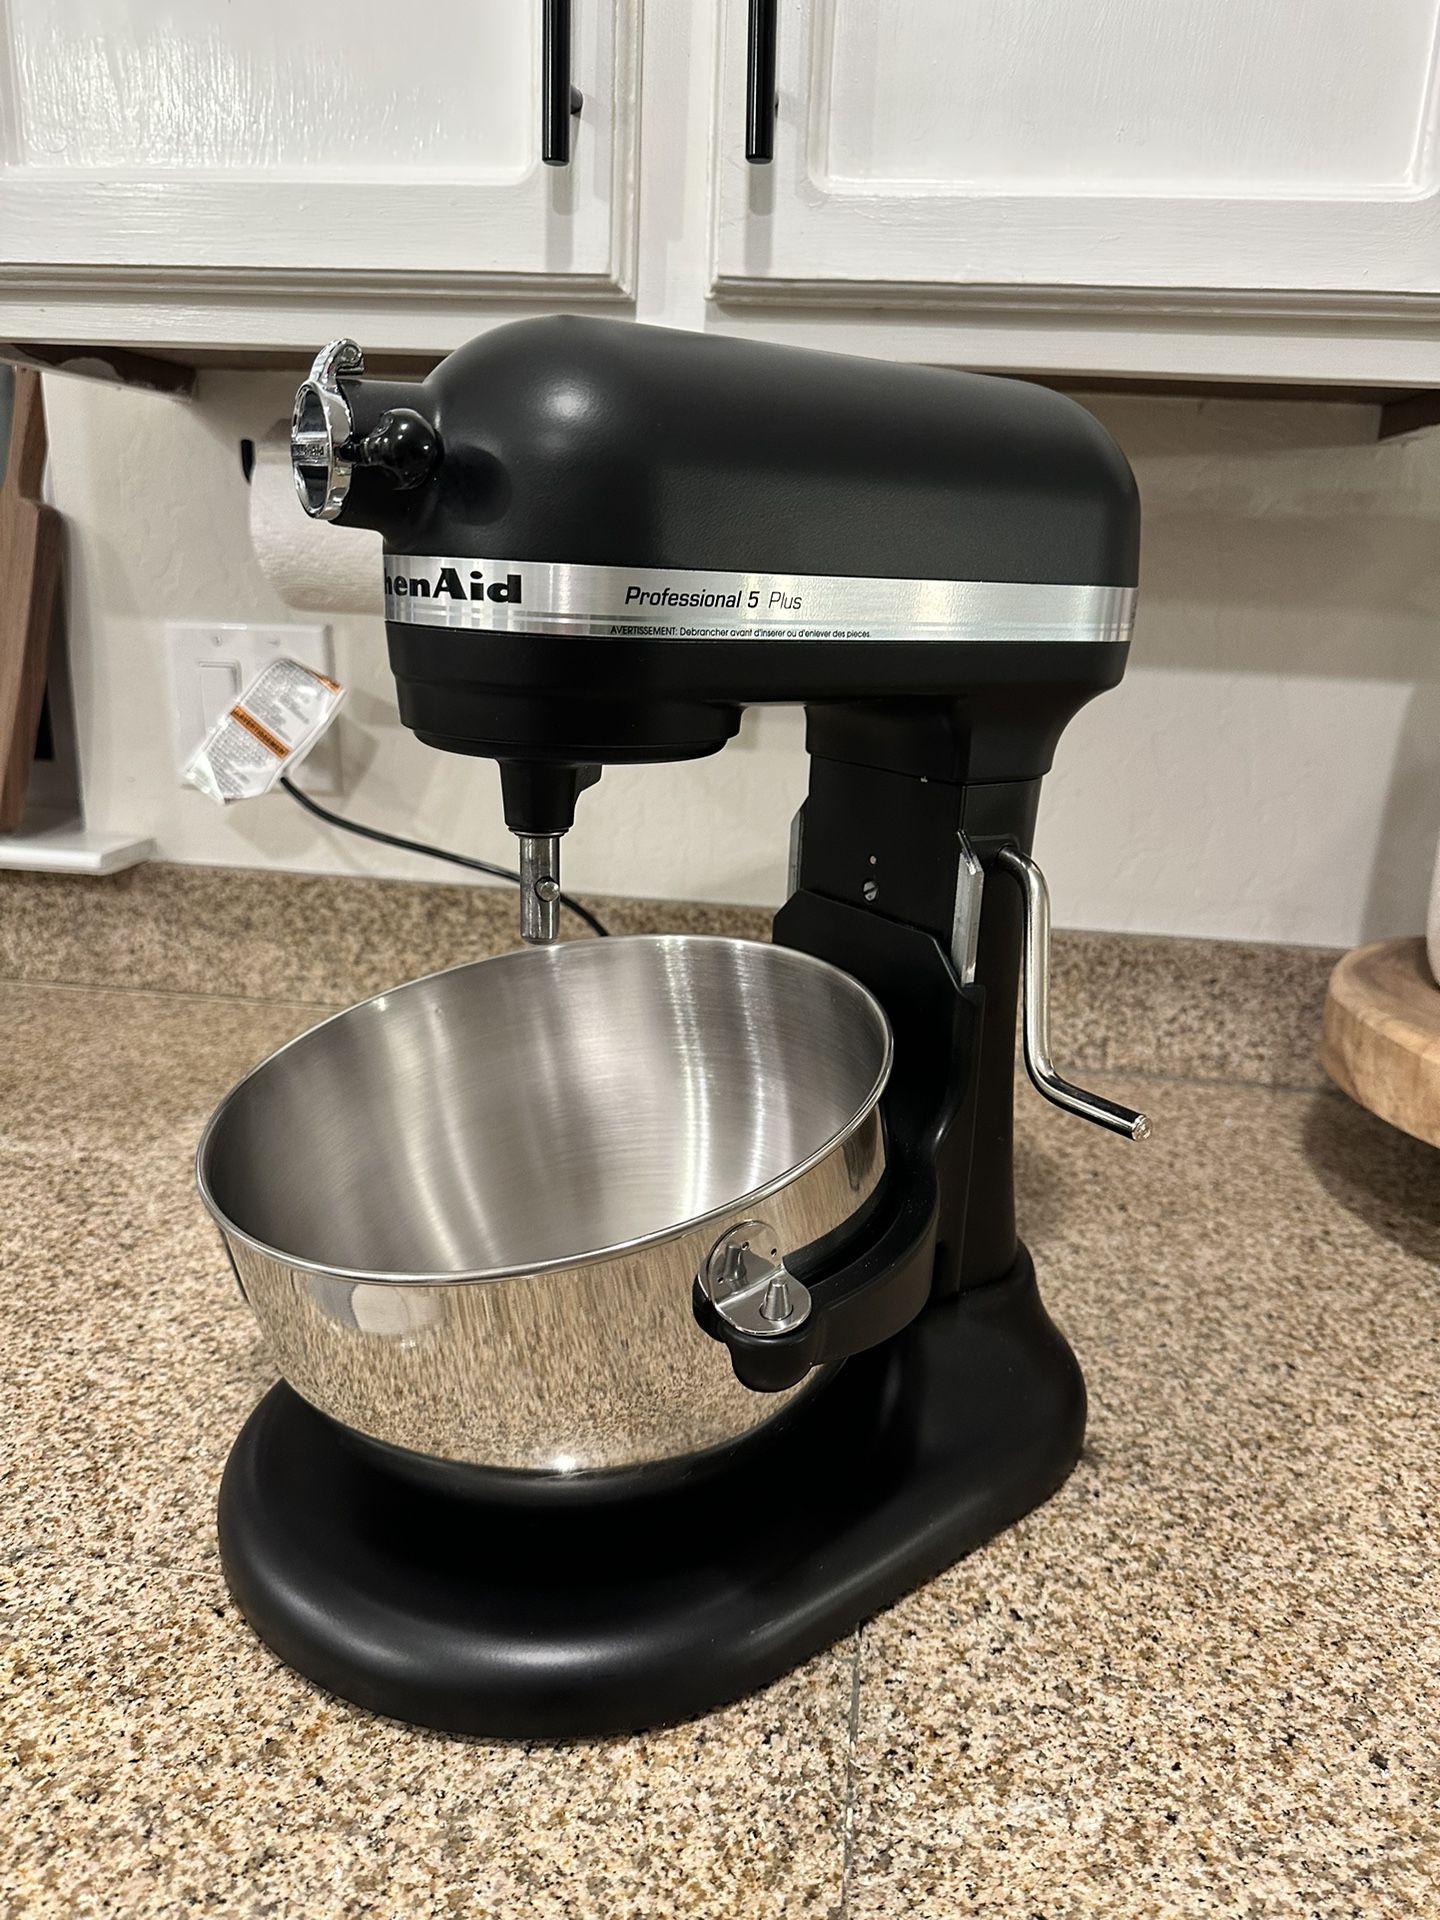 kitchenAid Sifter + Scale for Sale in Elk Grove, CA - OfferUp